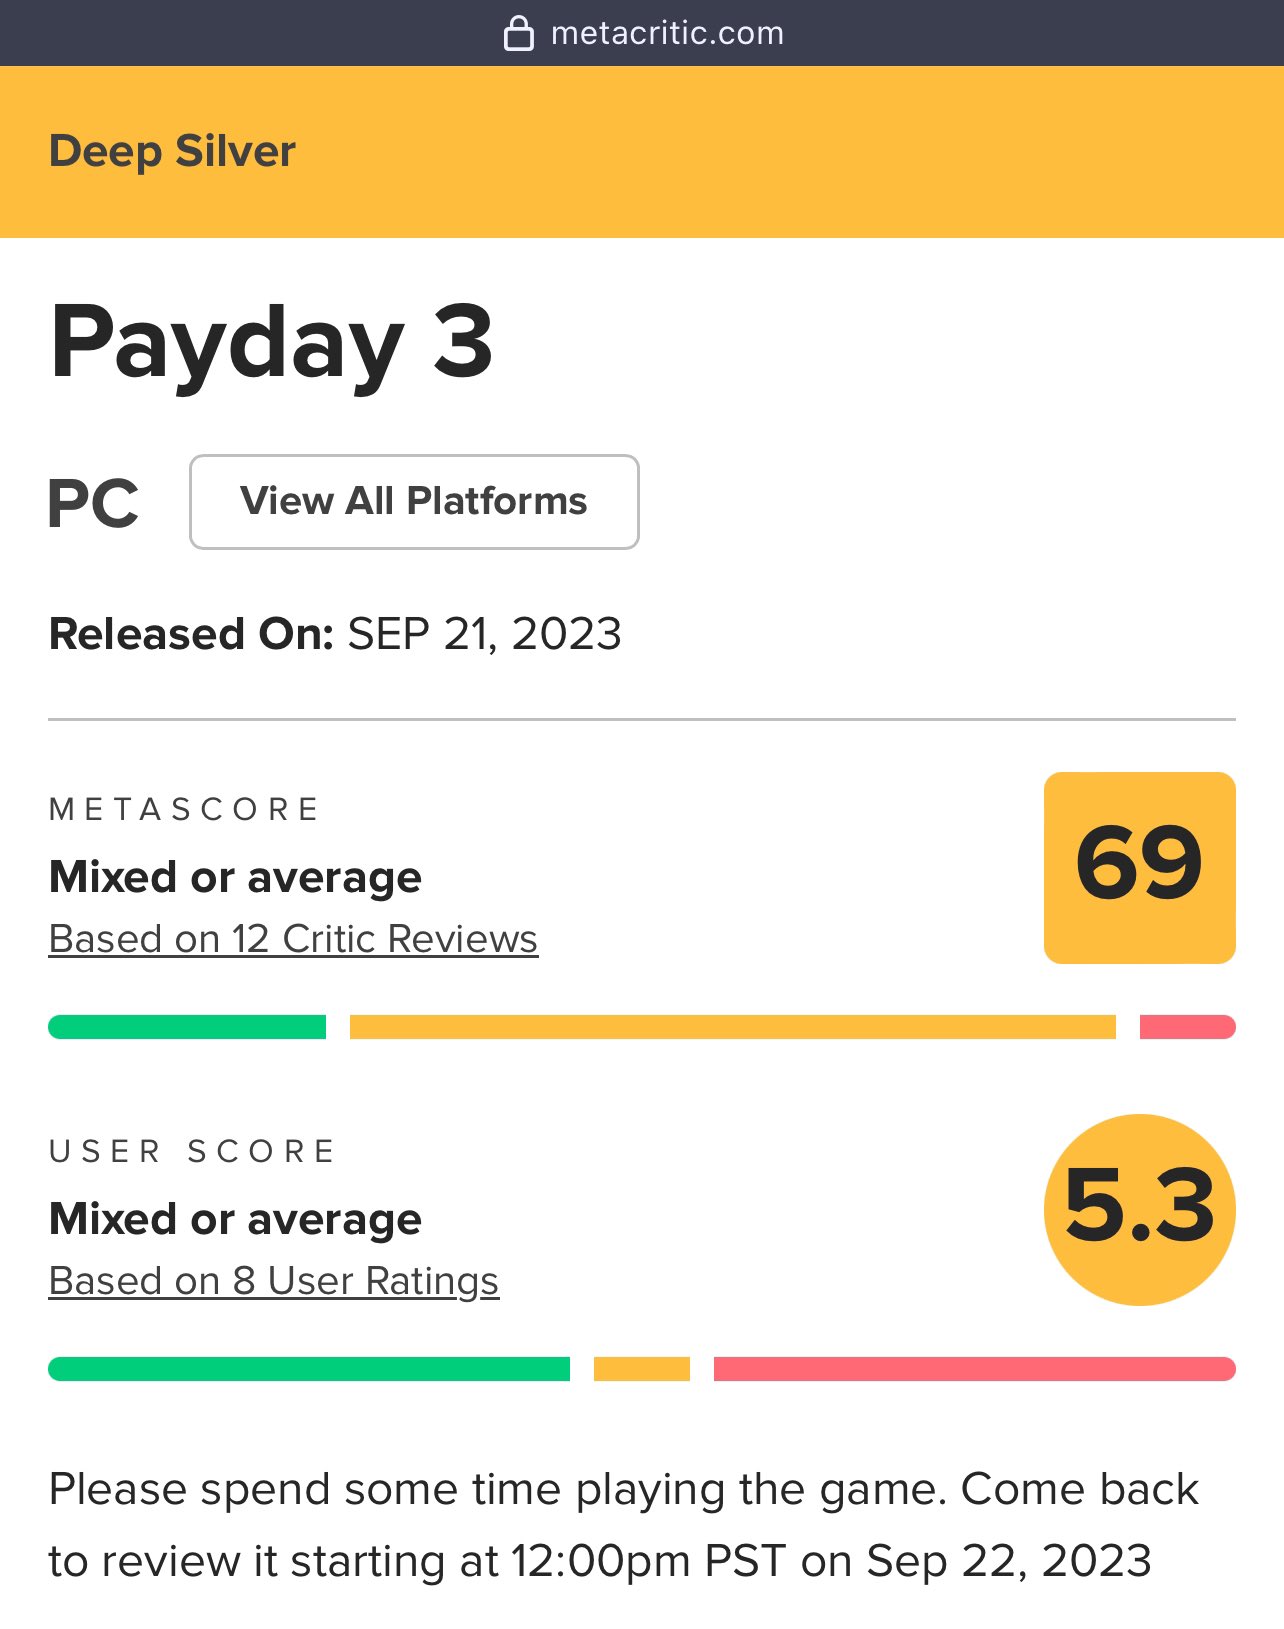 THE RED DRAGON on X: Metacritic scores are dropping for Call of